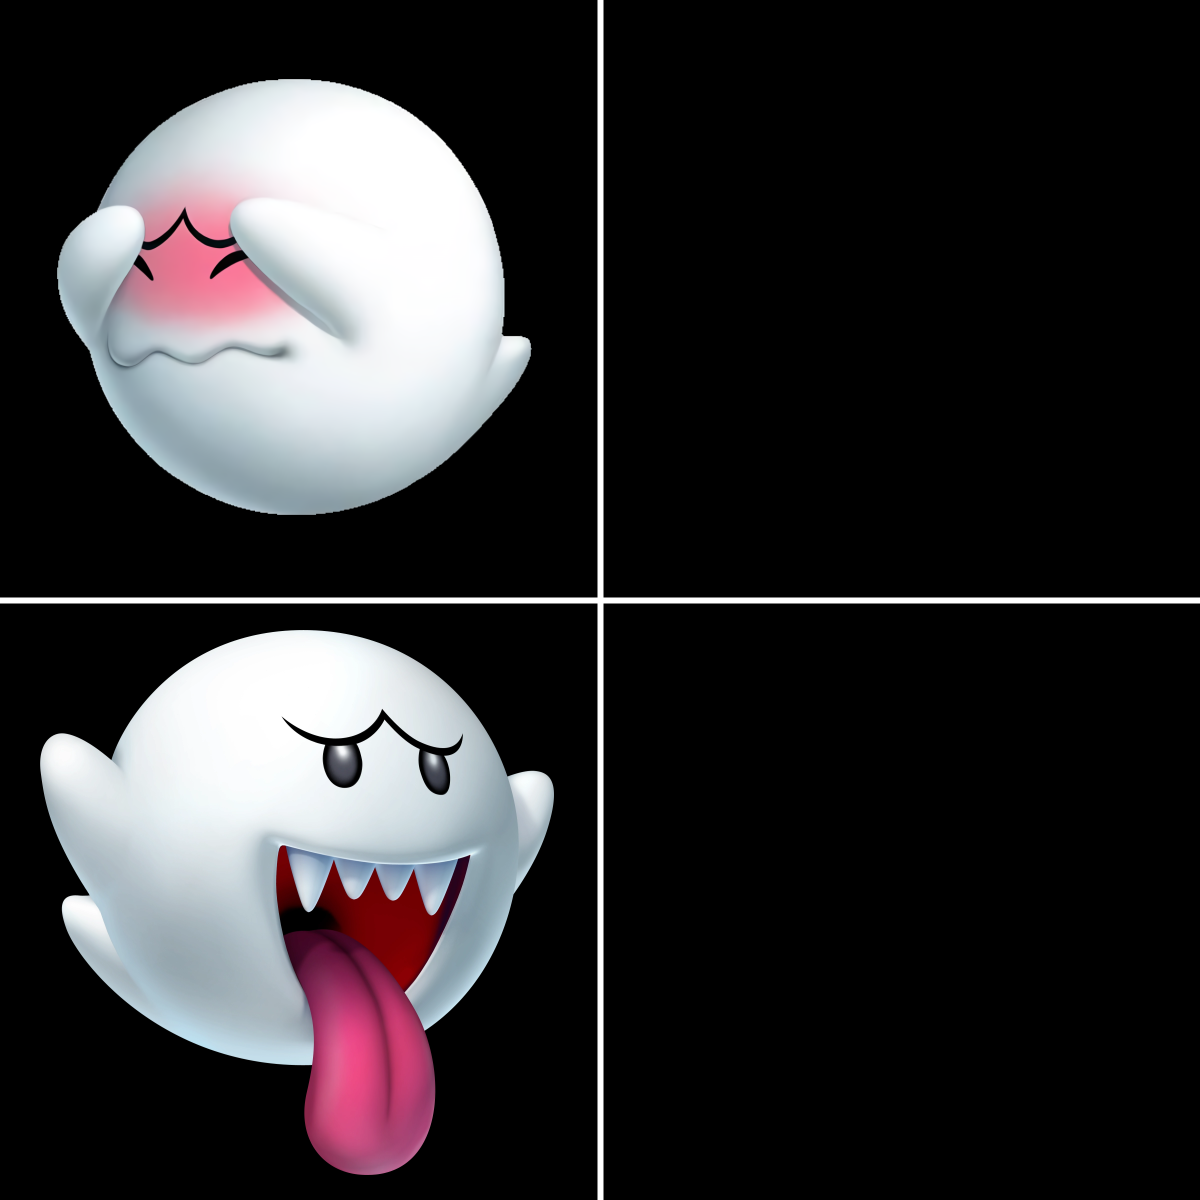 High Quality Drake alternative with Boo ghost from Super Mario (dark) Blank Meme Template